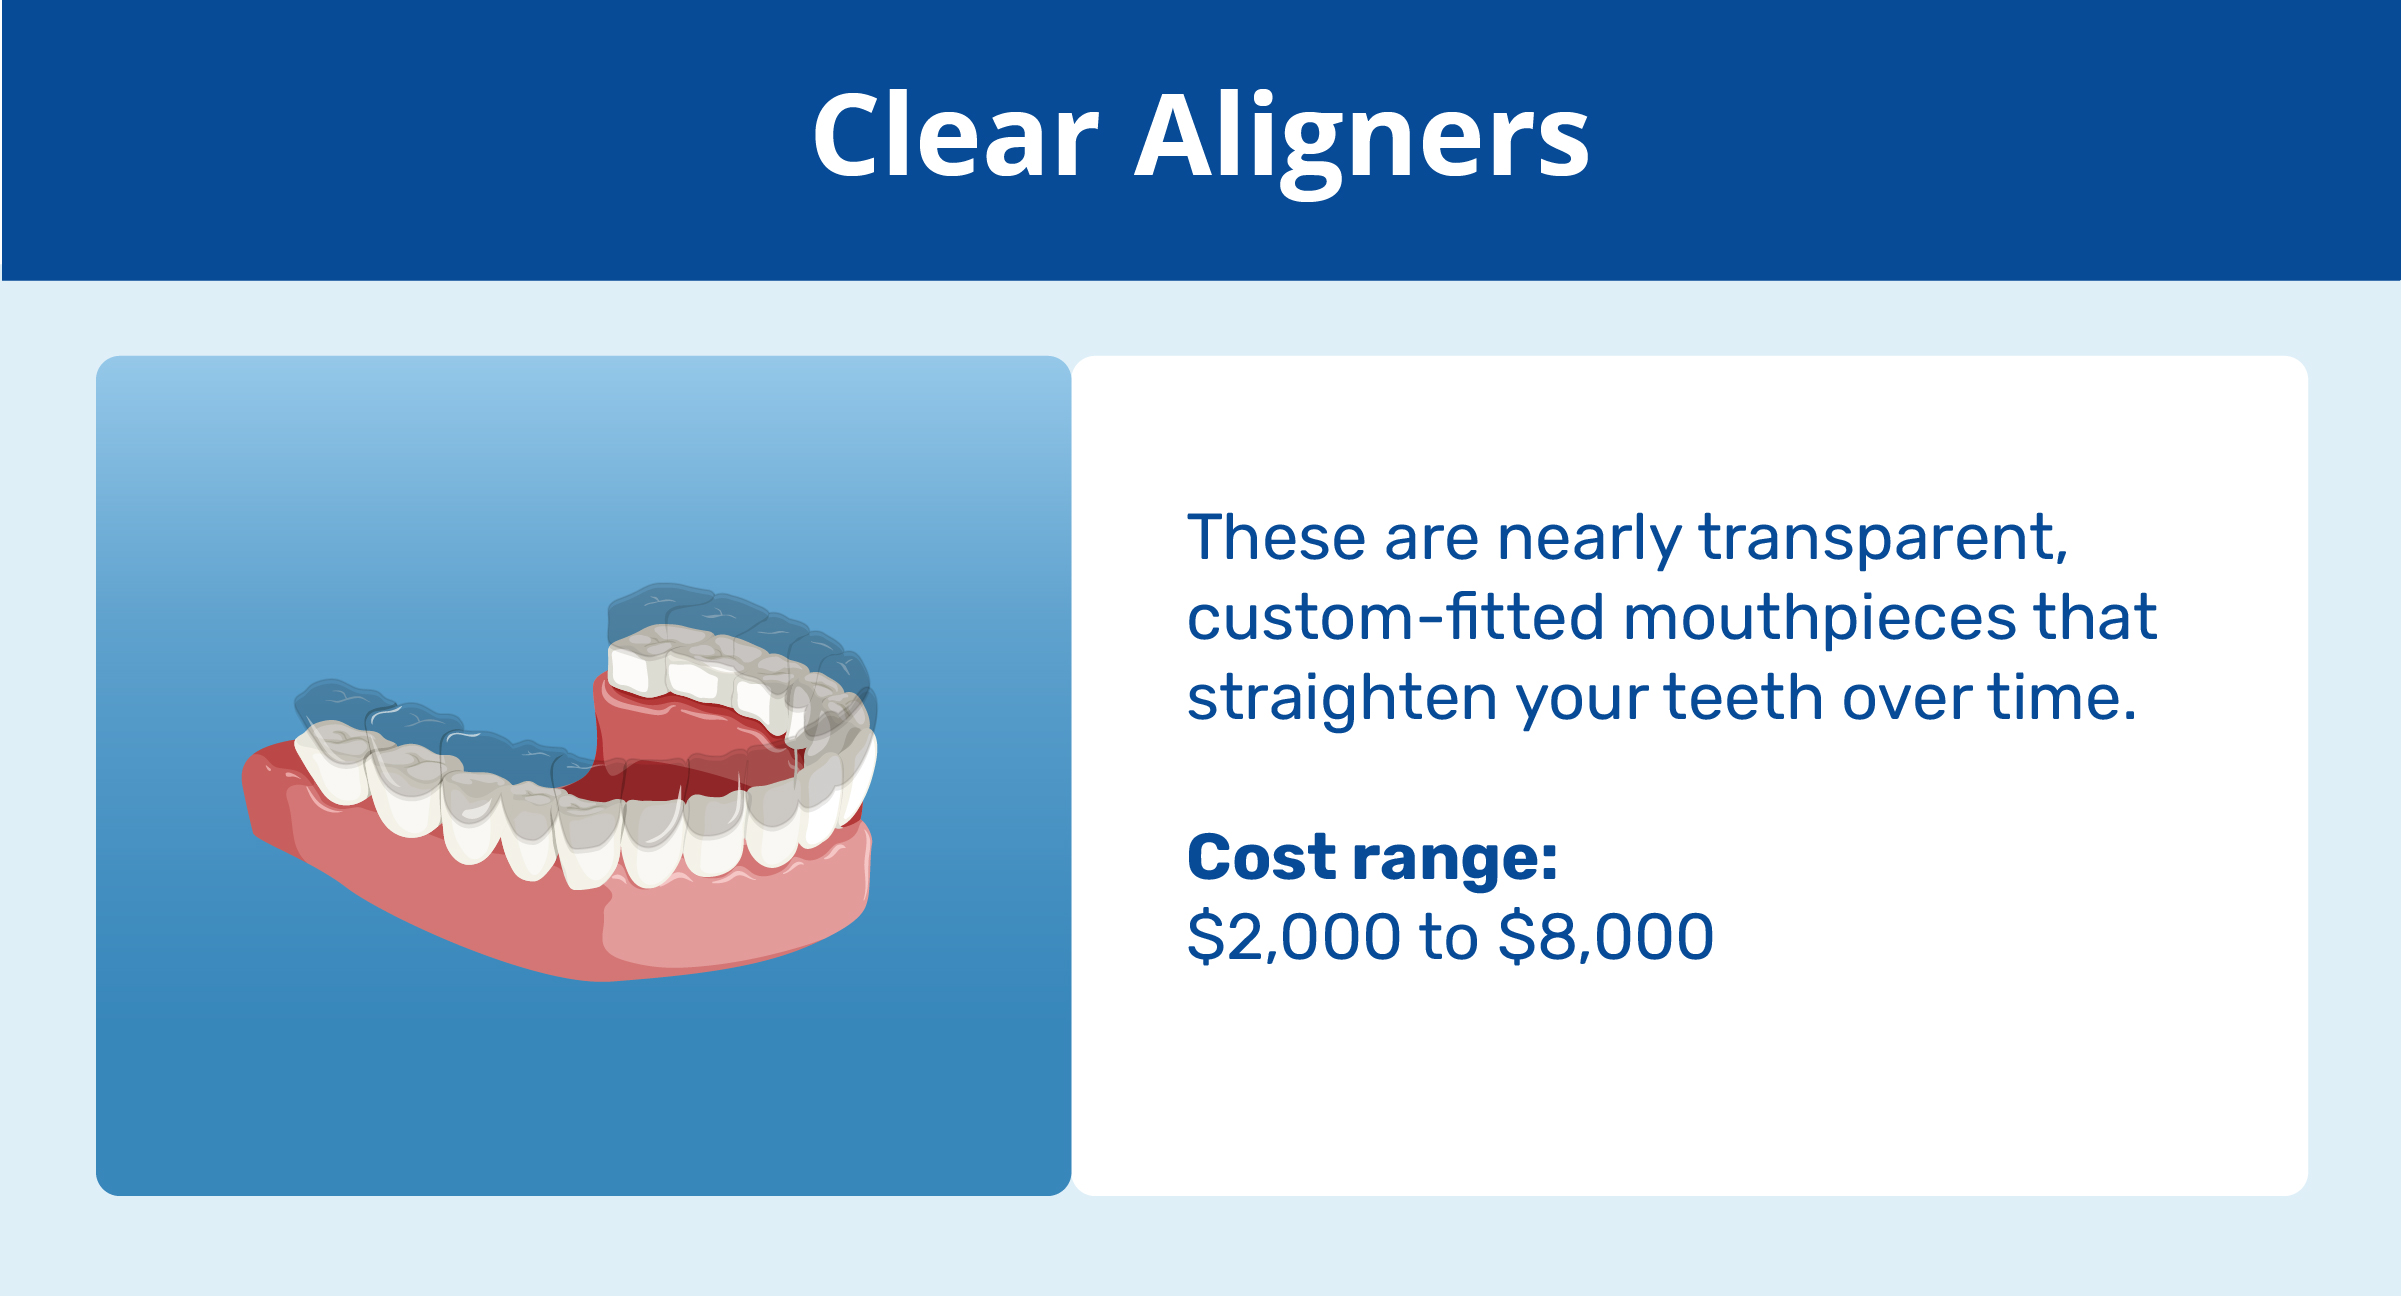 clear aligners and cost range